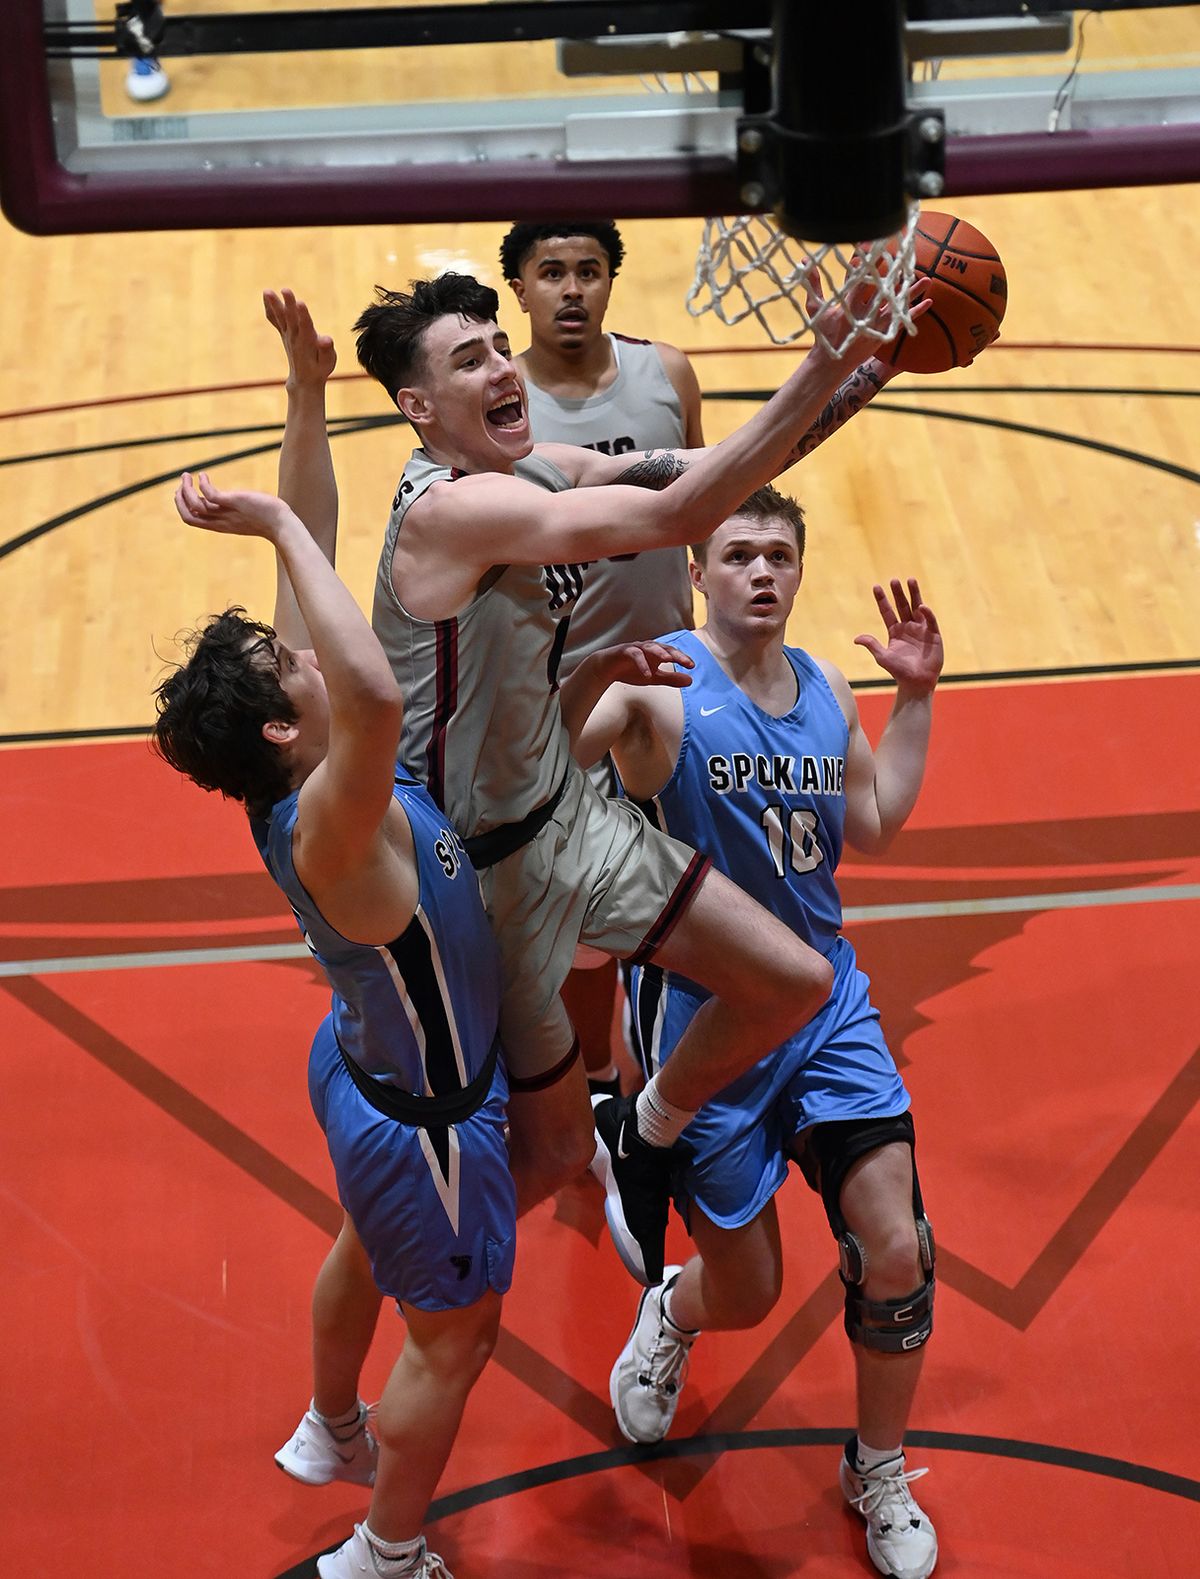 North Idaho College guard Cooper DeWit heads for a layup as Community Colleges of Spokane guard Paul Terry on left, defends in the first half of a college basketball game, Tuesday, April 13, 2021, at North Idaho College.  (Colin Mulvany/THE SPOKESMAN-REVIEW)